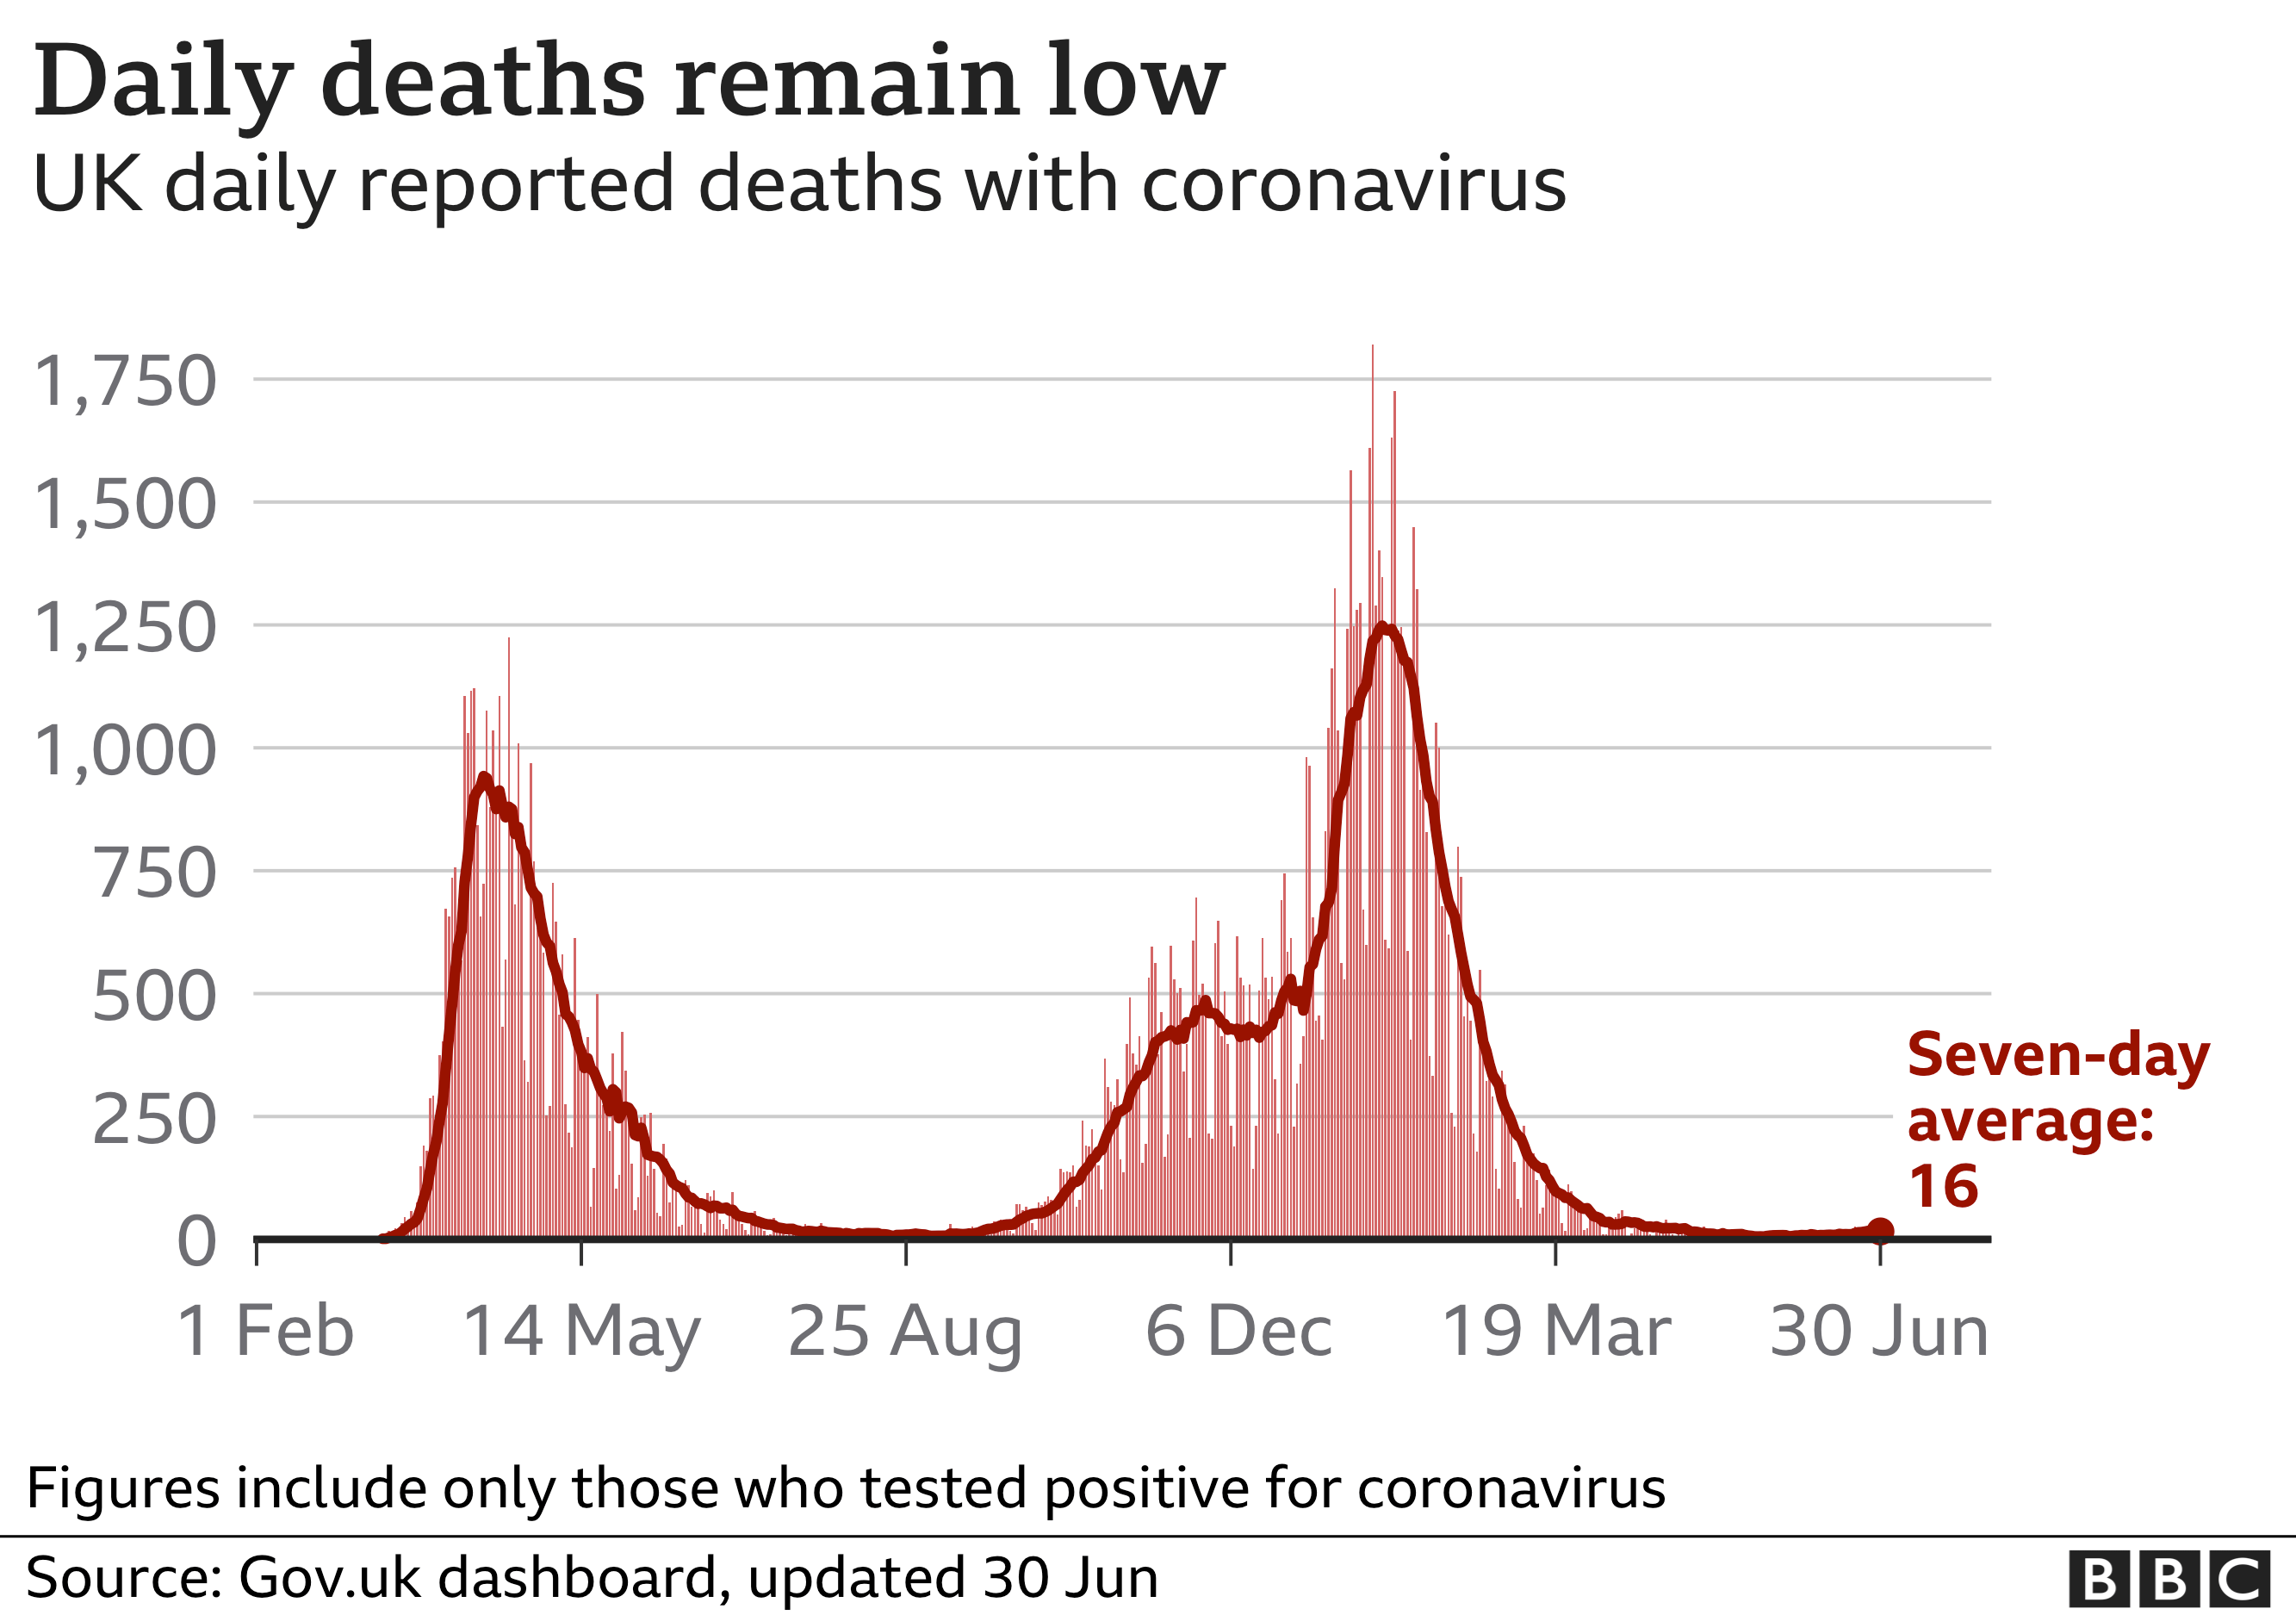 Chart showing that the number of daily deaths remains low